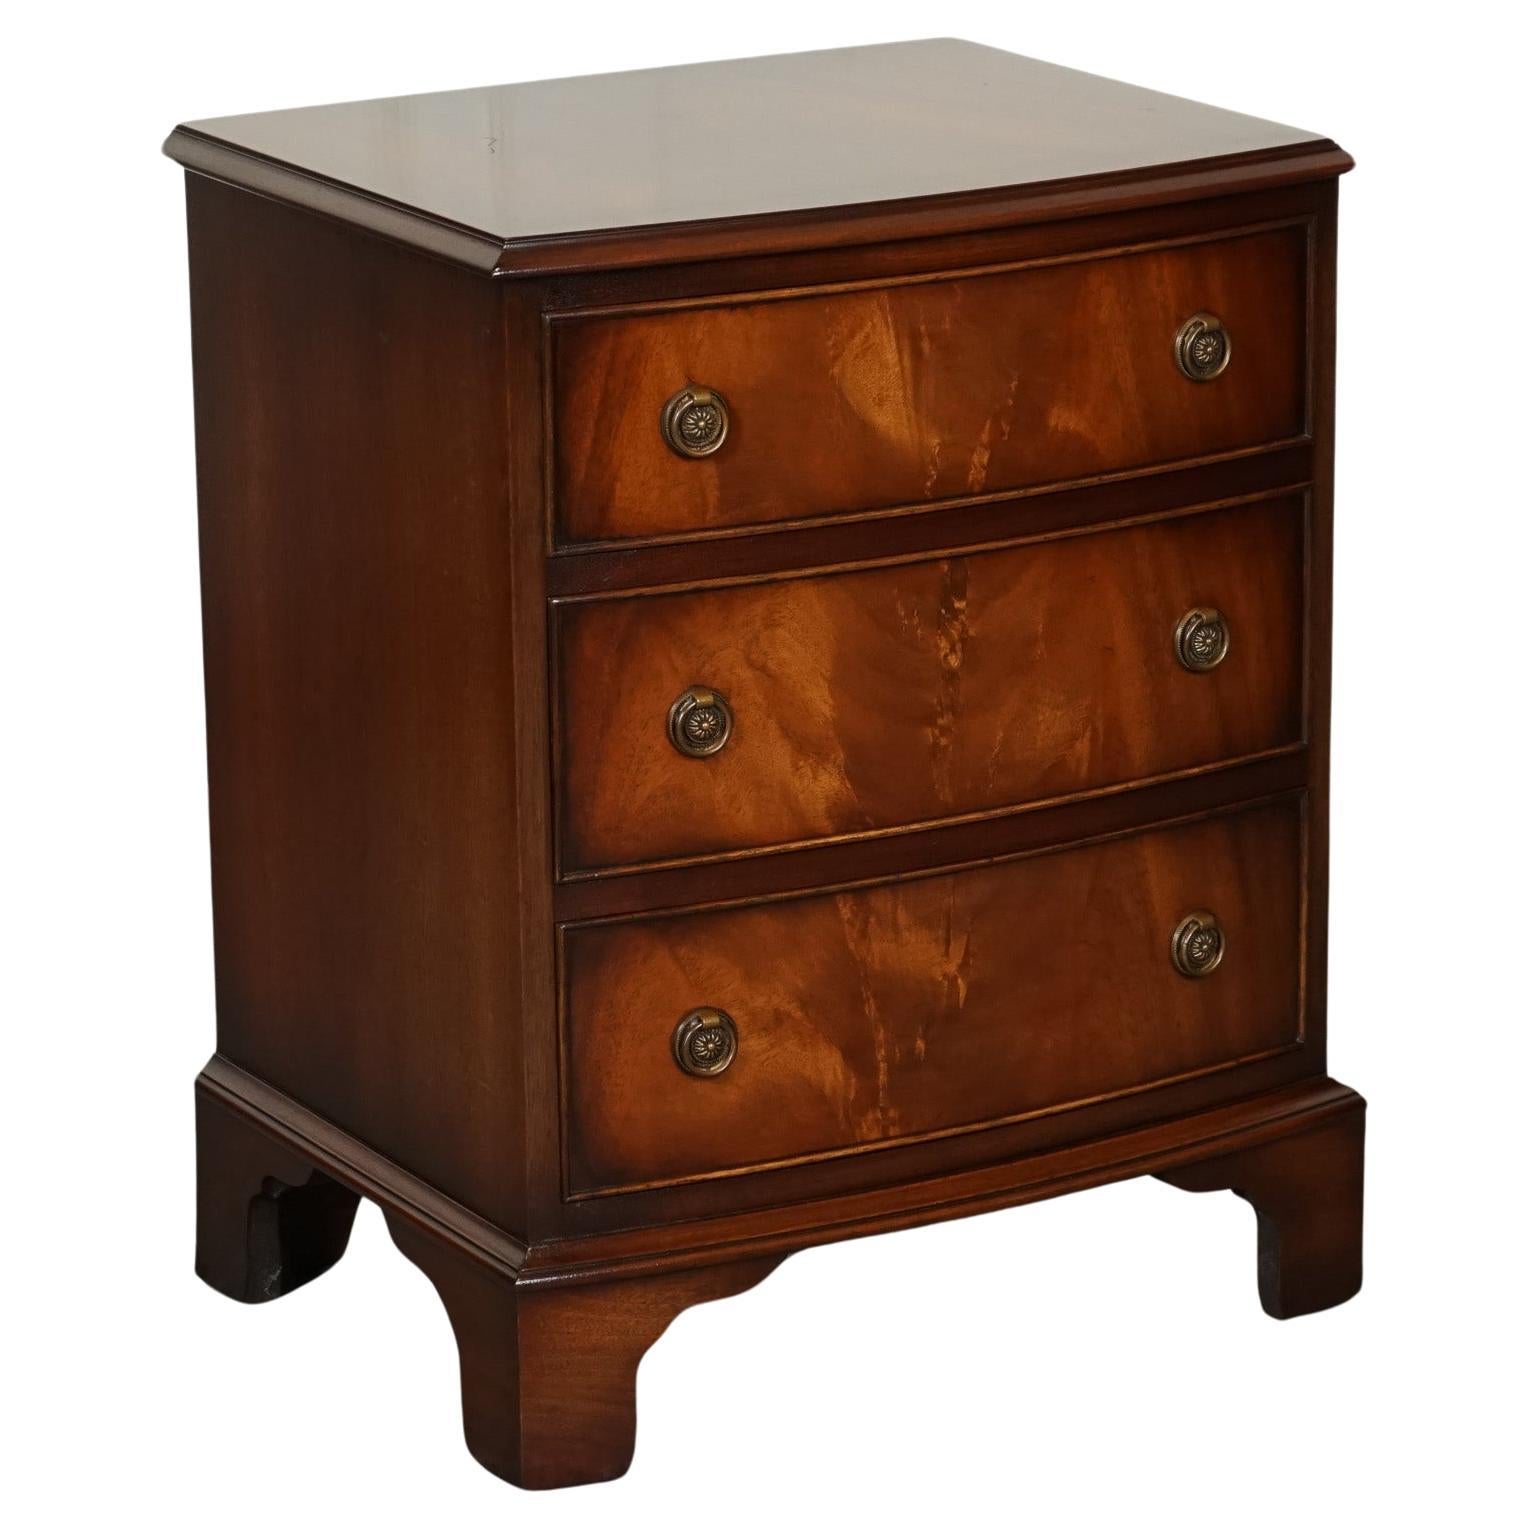 Bevan Funnell Ltd. Commodes and Chests of Drawers